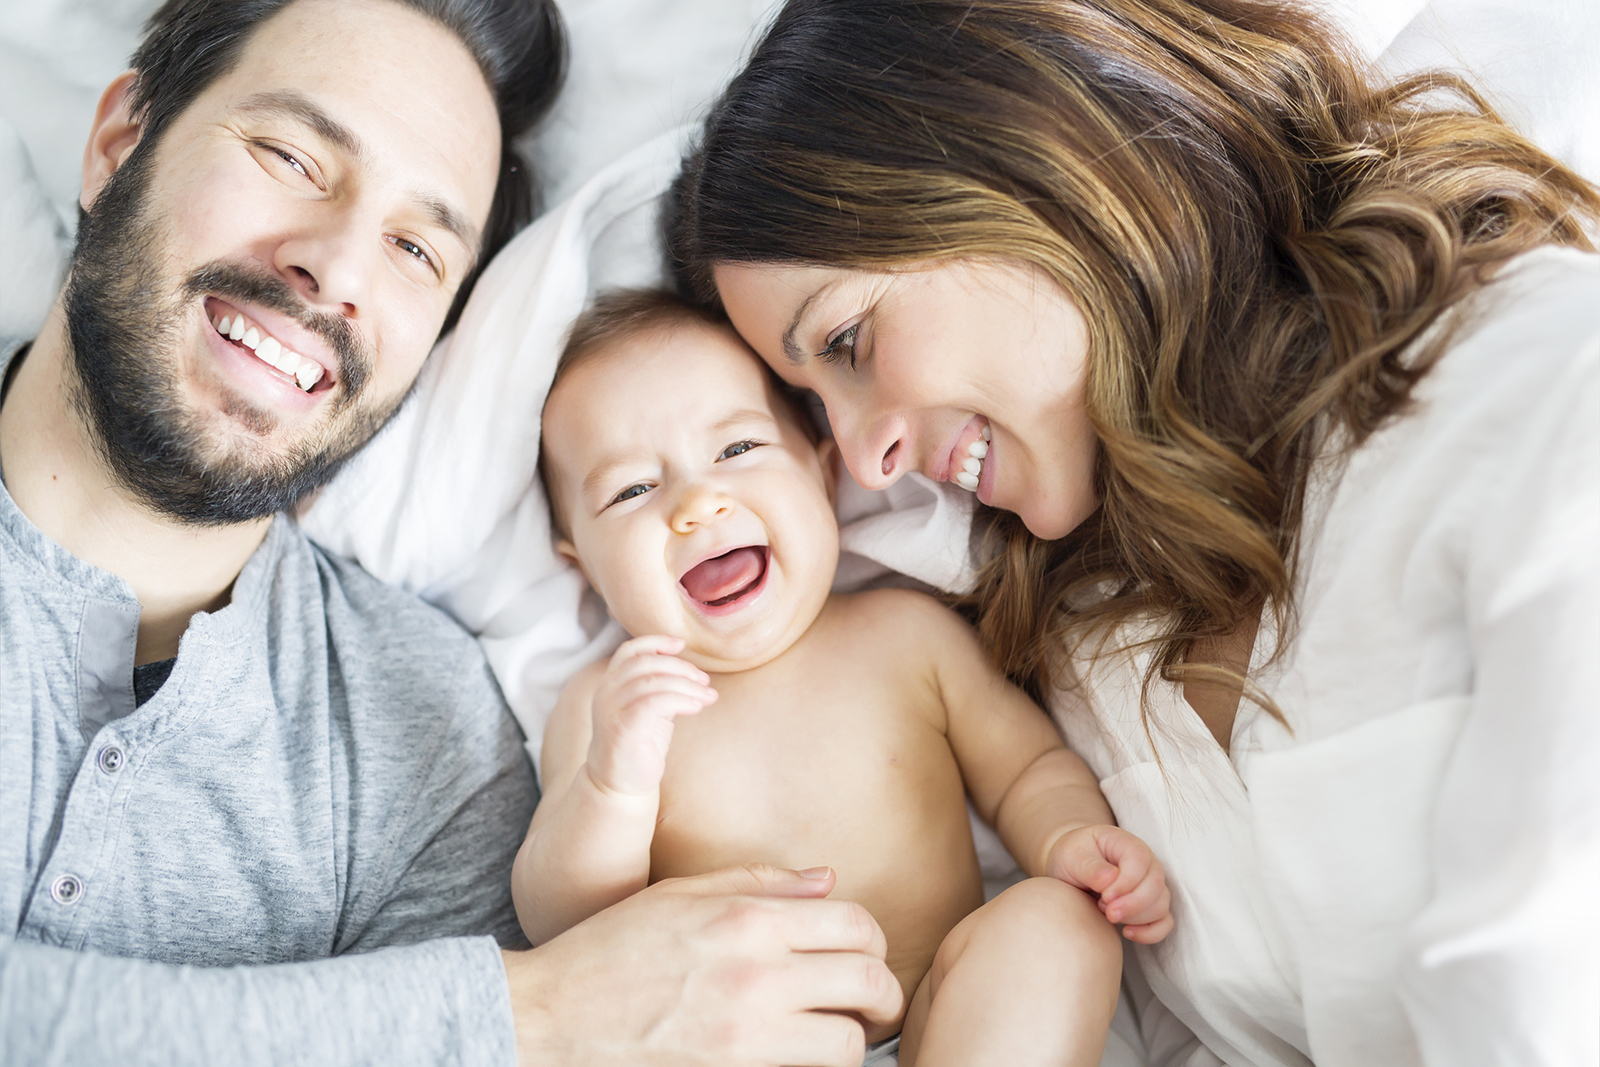 Mother and father via surrogacy with their baby on a bed